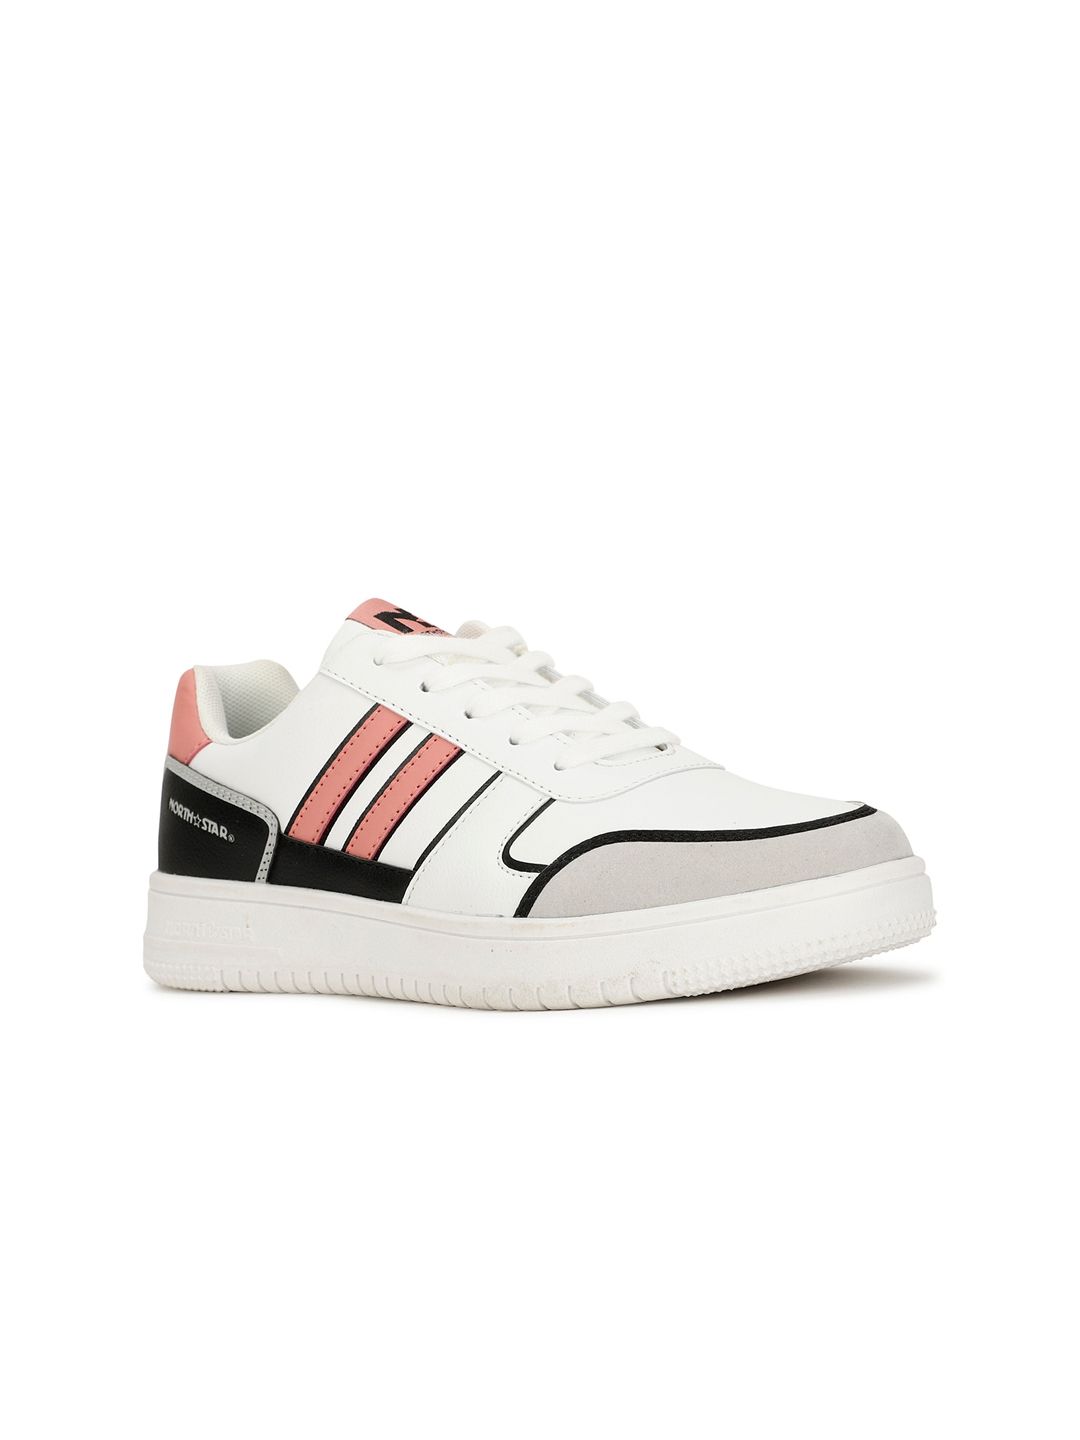 North Star Women Striped Comfort Insole Sneakers Price in India